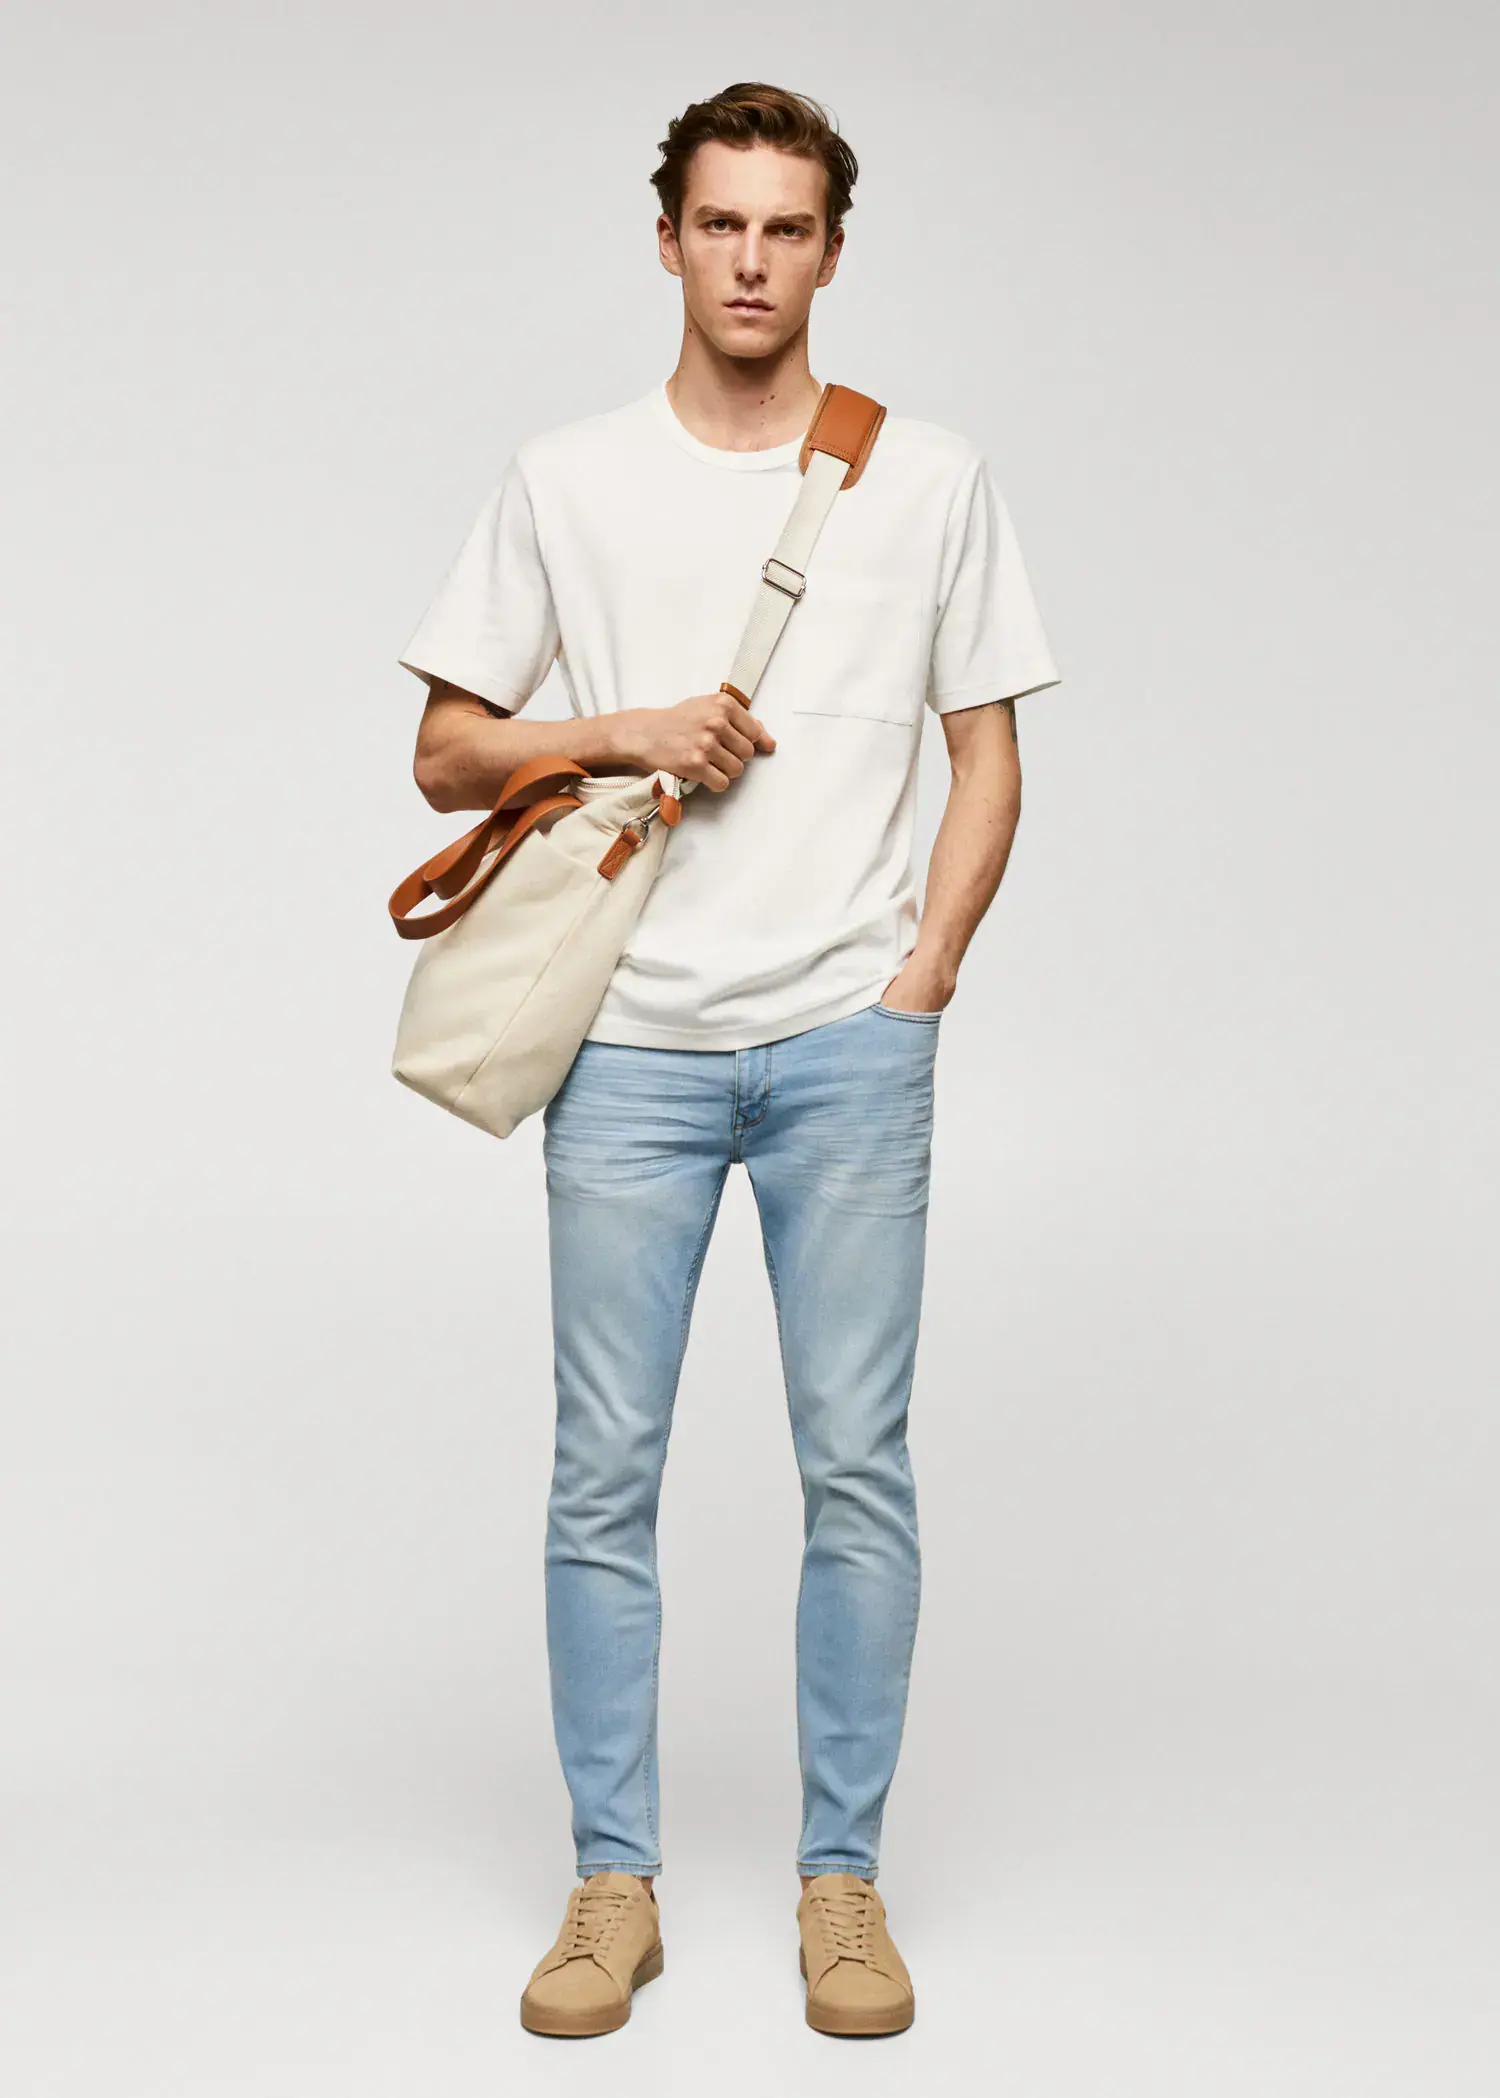 Mango Jude skinny-fit jeans. a man holding a bag while standing in a room. 